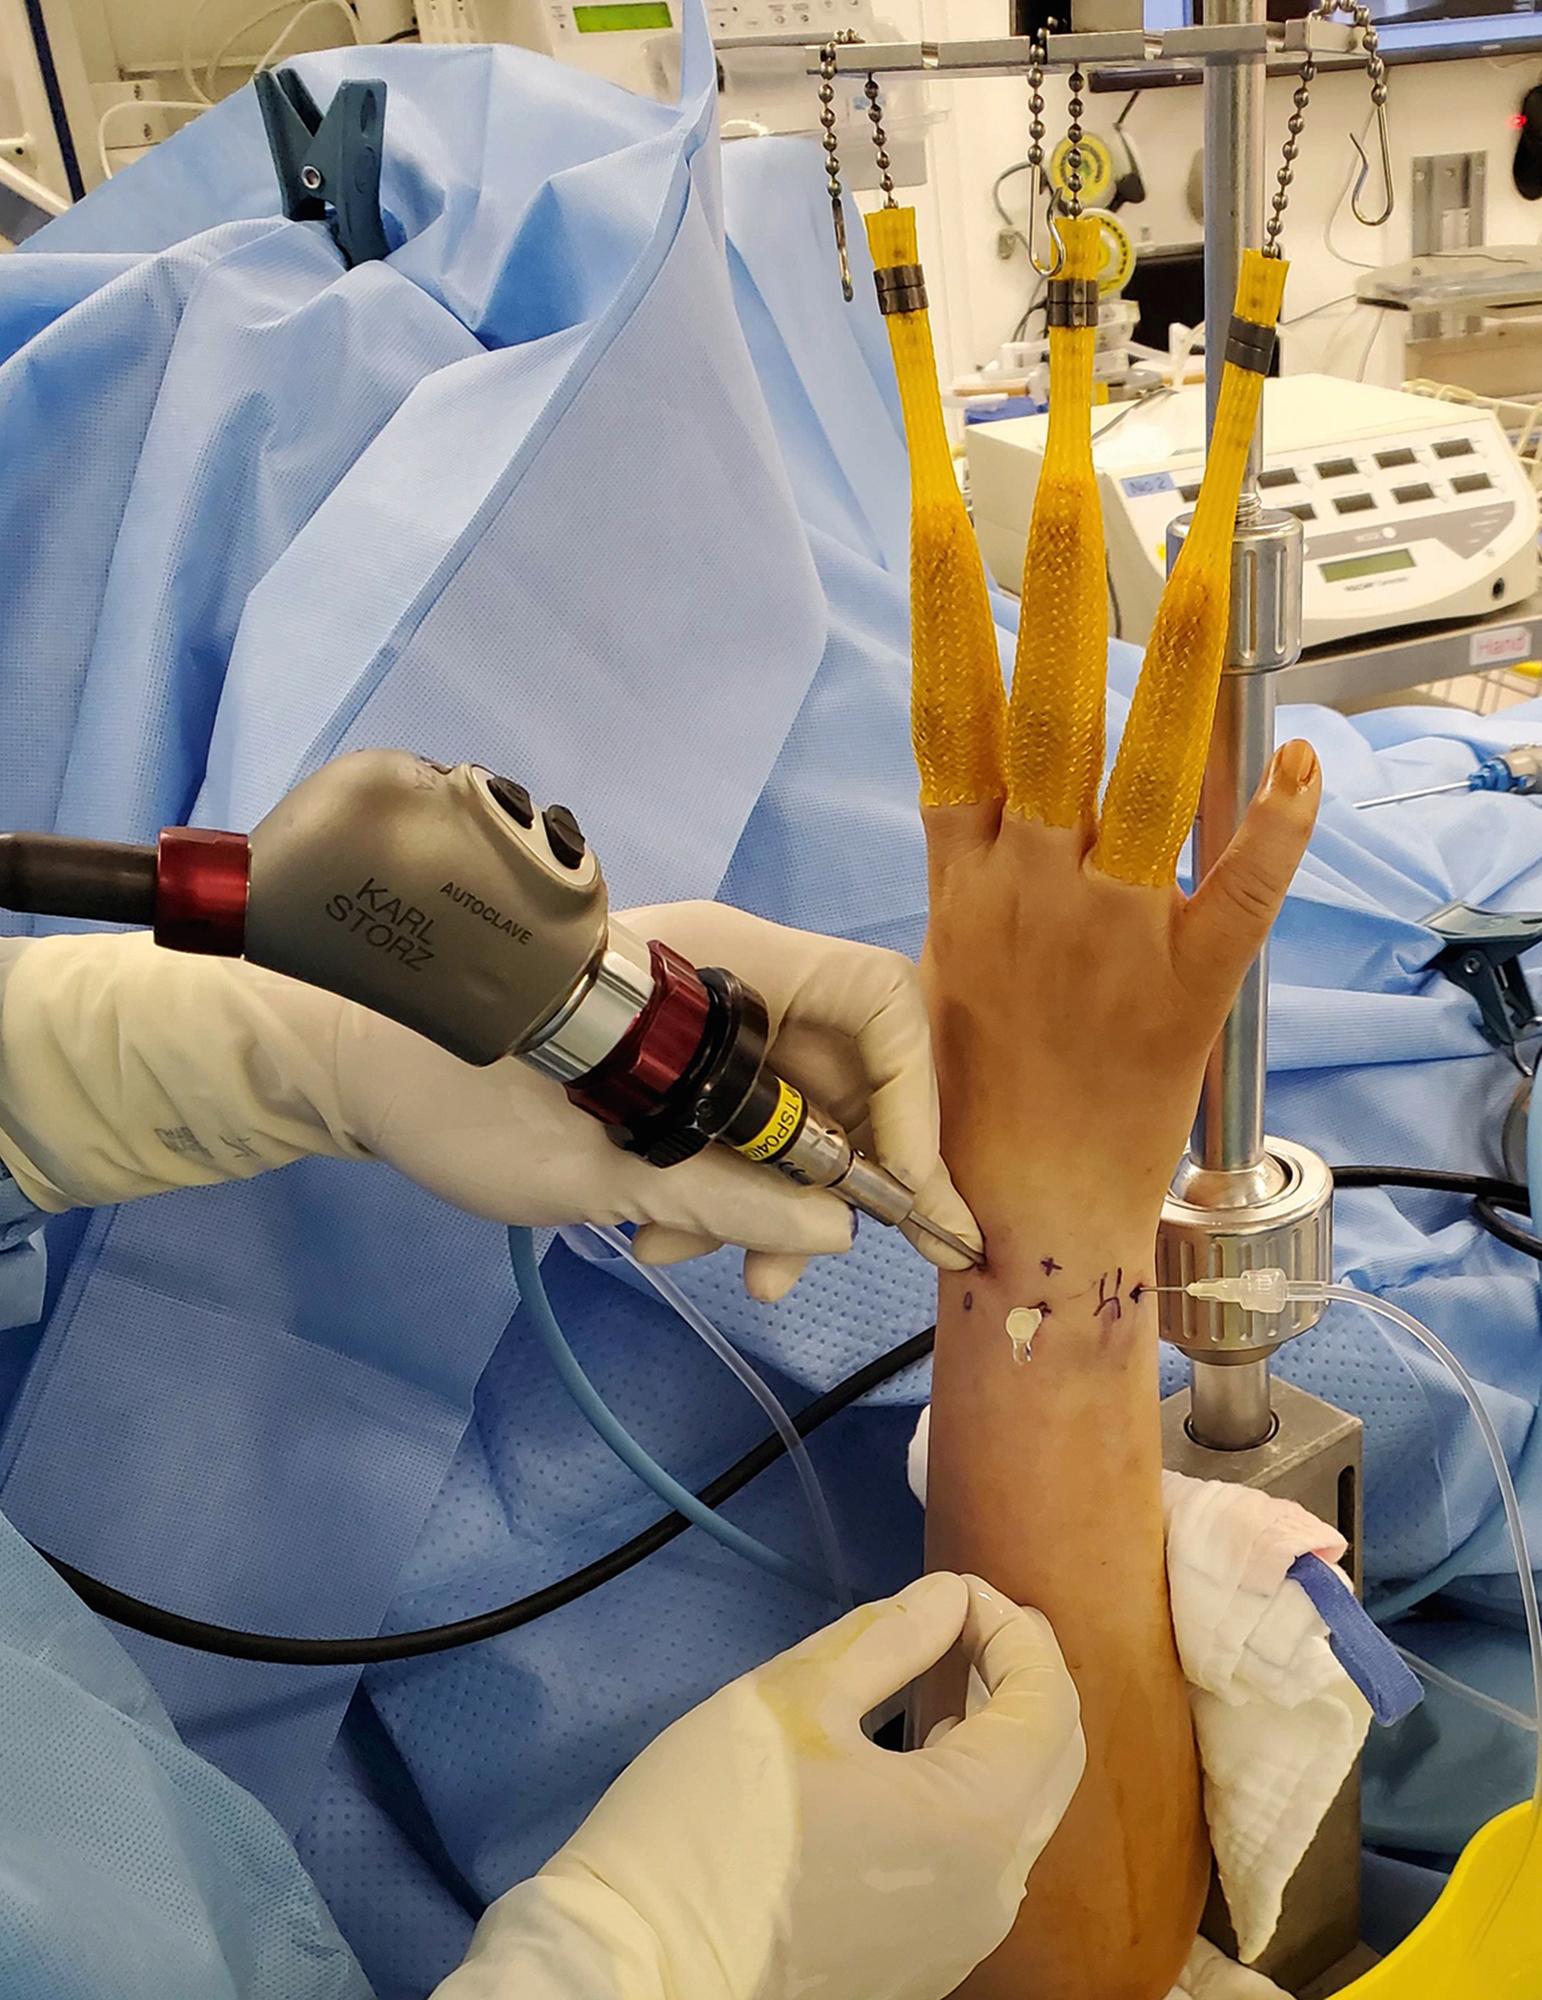 Fig. 17.4, Finger pivoting technique to control the fine movement of the arthroscope within the joint. When moving the arthroscope inside the joint, use screwing action rather than straight in and out action to avoid frequent dropping of the scope out of the shallow joint.